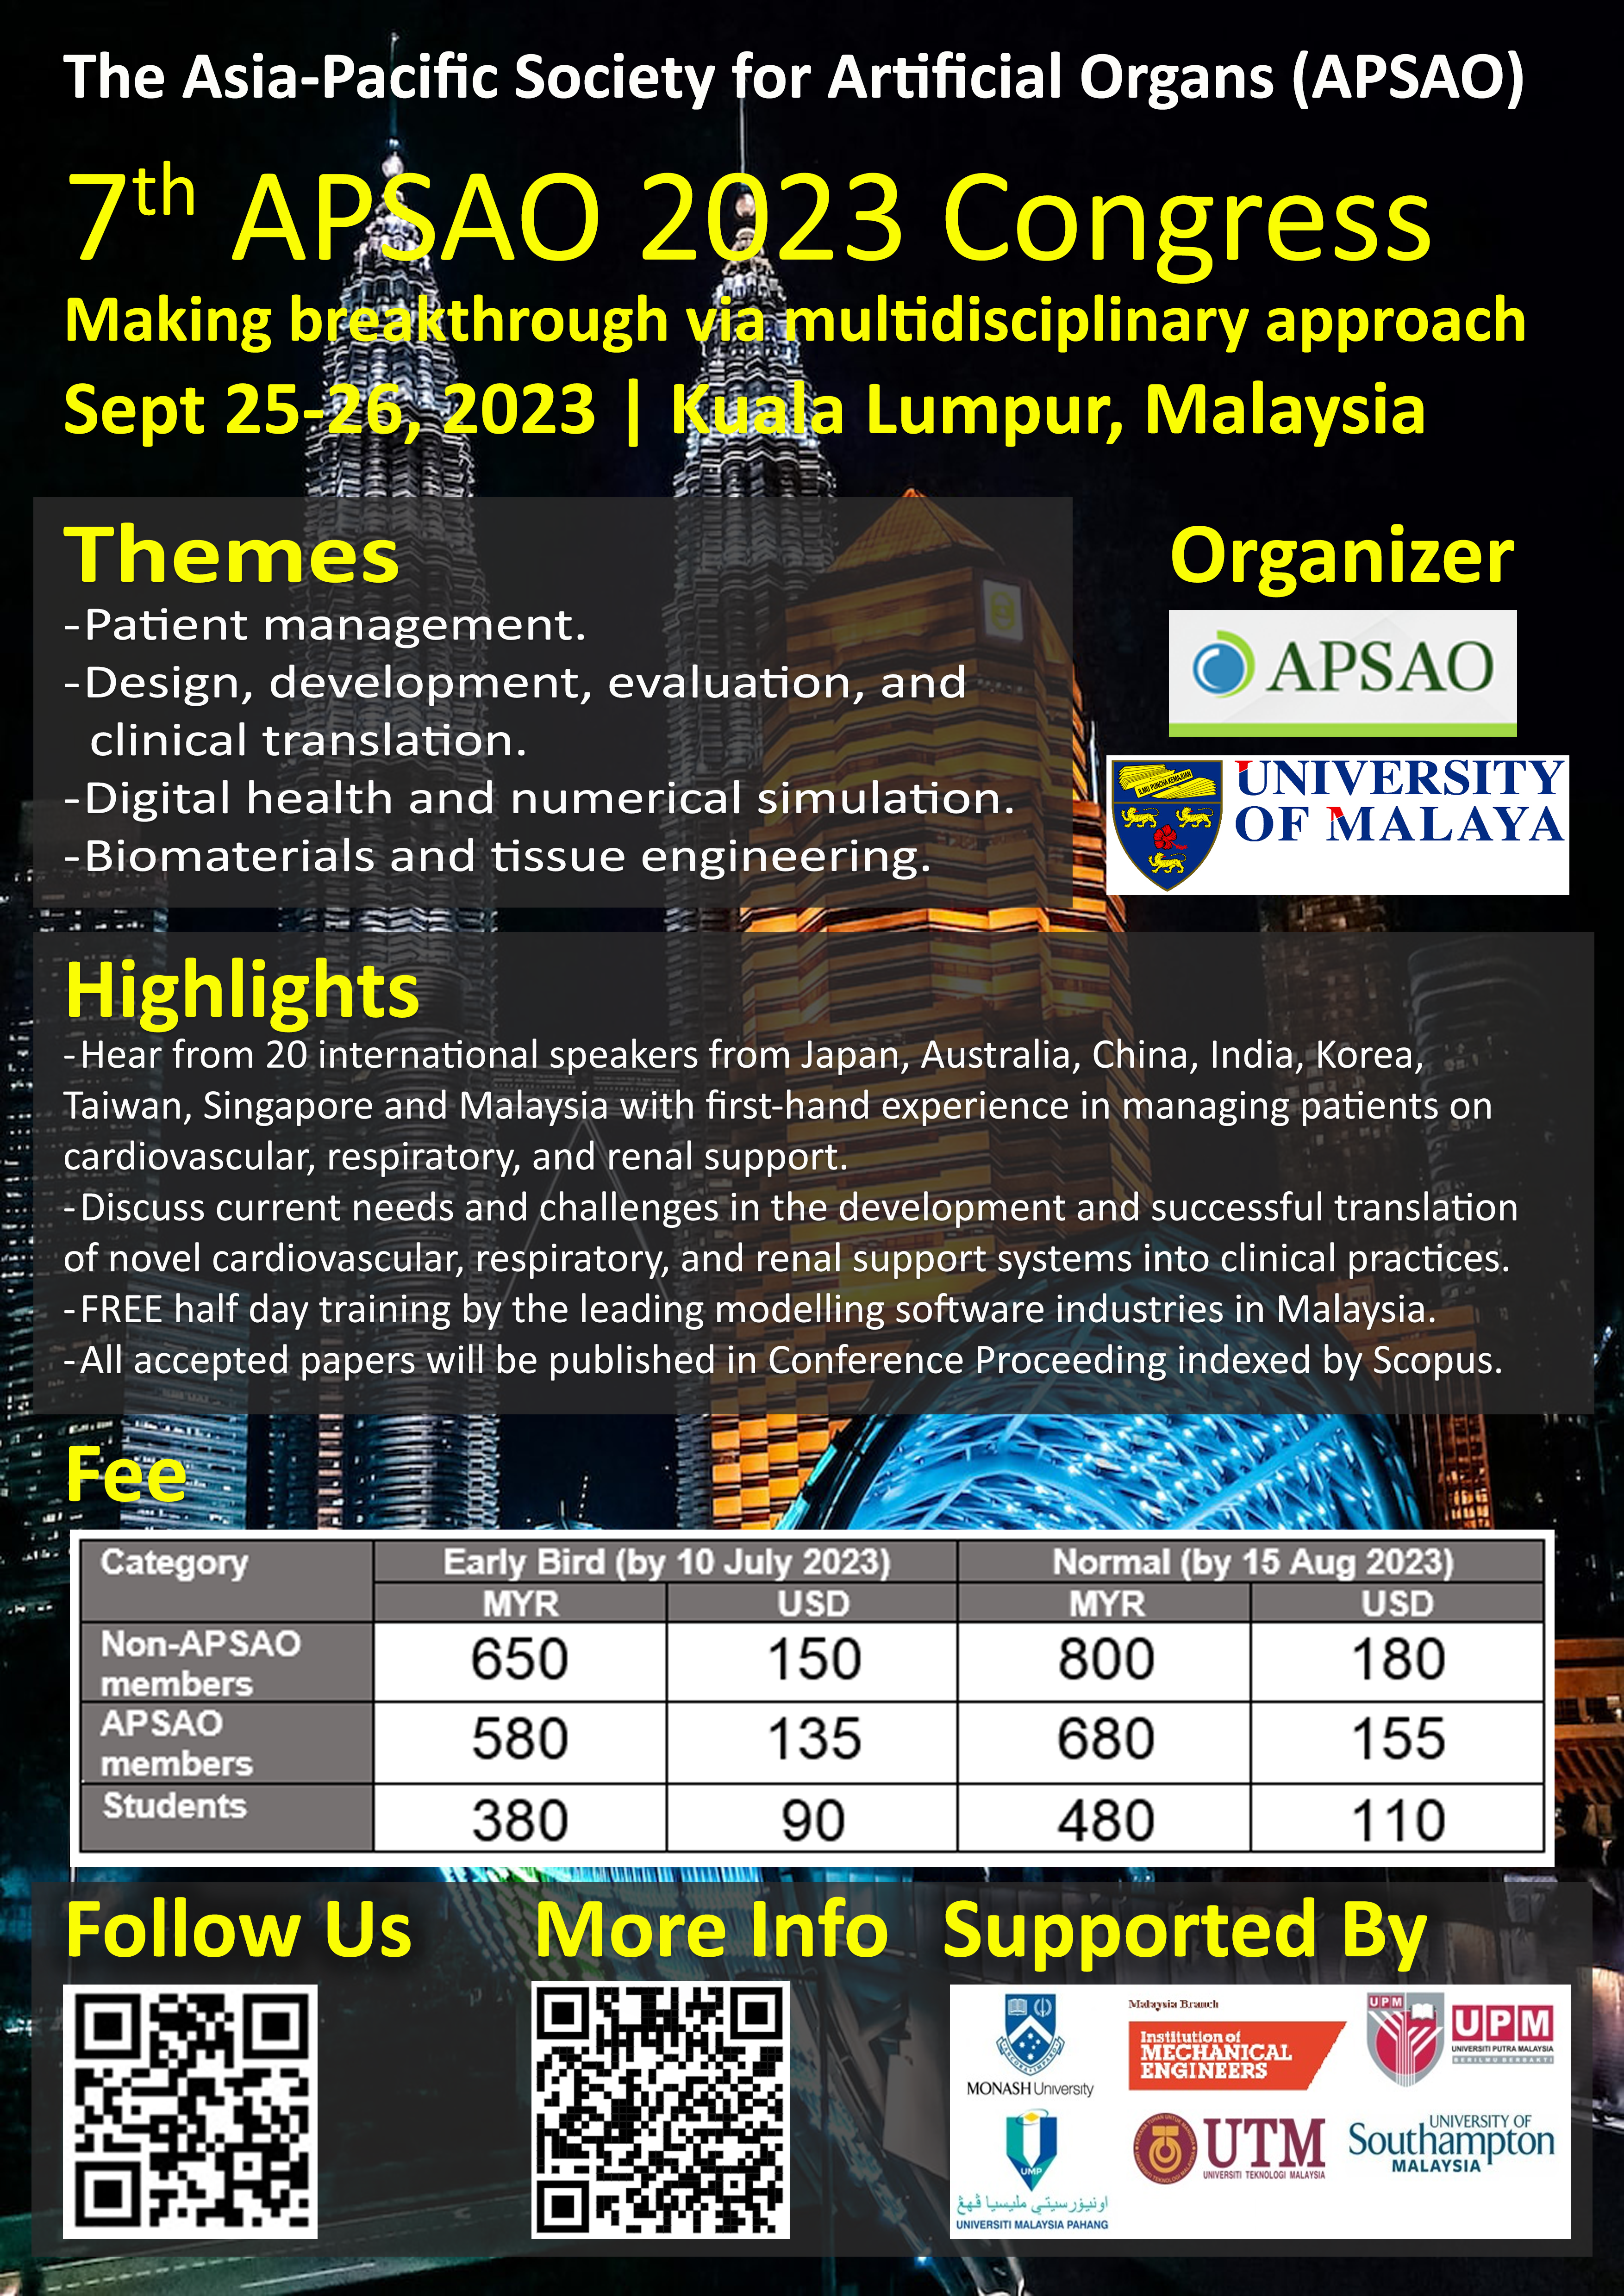 The 7th Asia-Pacific Society for Artificial Organs (APSAO) 2023 Congress: CALL for PAPERS (due 31 May 2023)